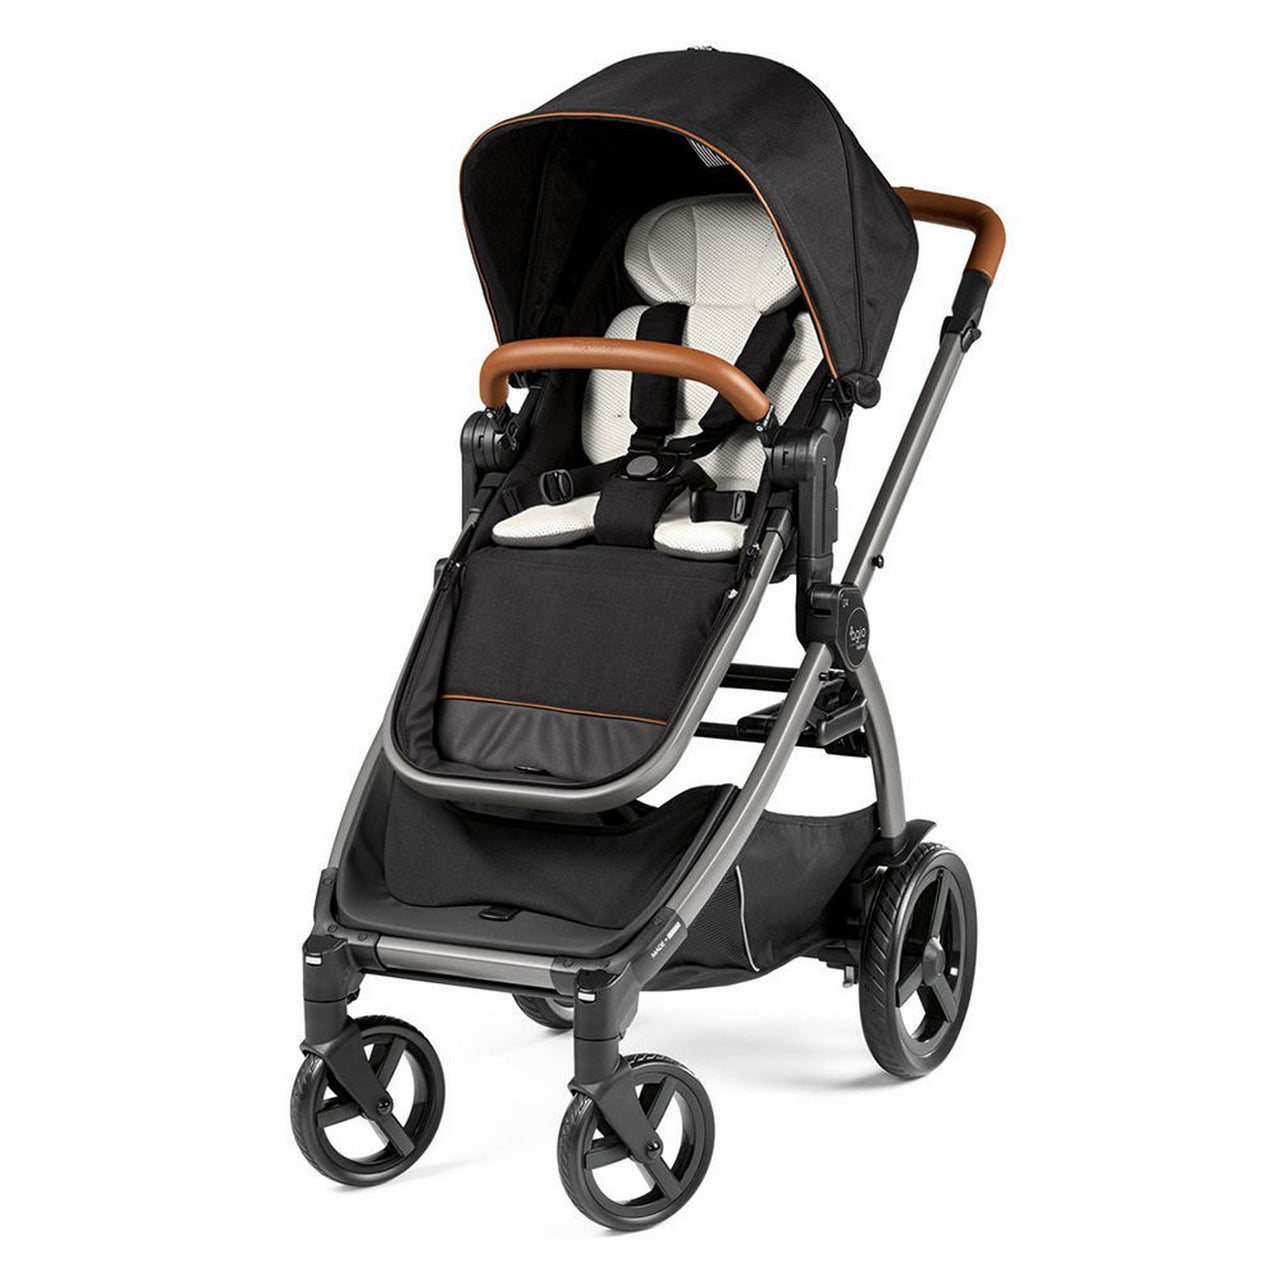 Peg Perego - Baby Products, Accessories & Ride-on Toys